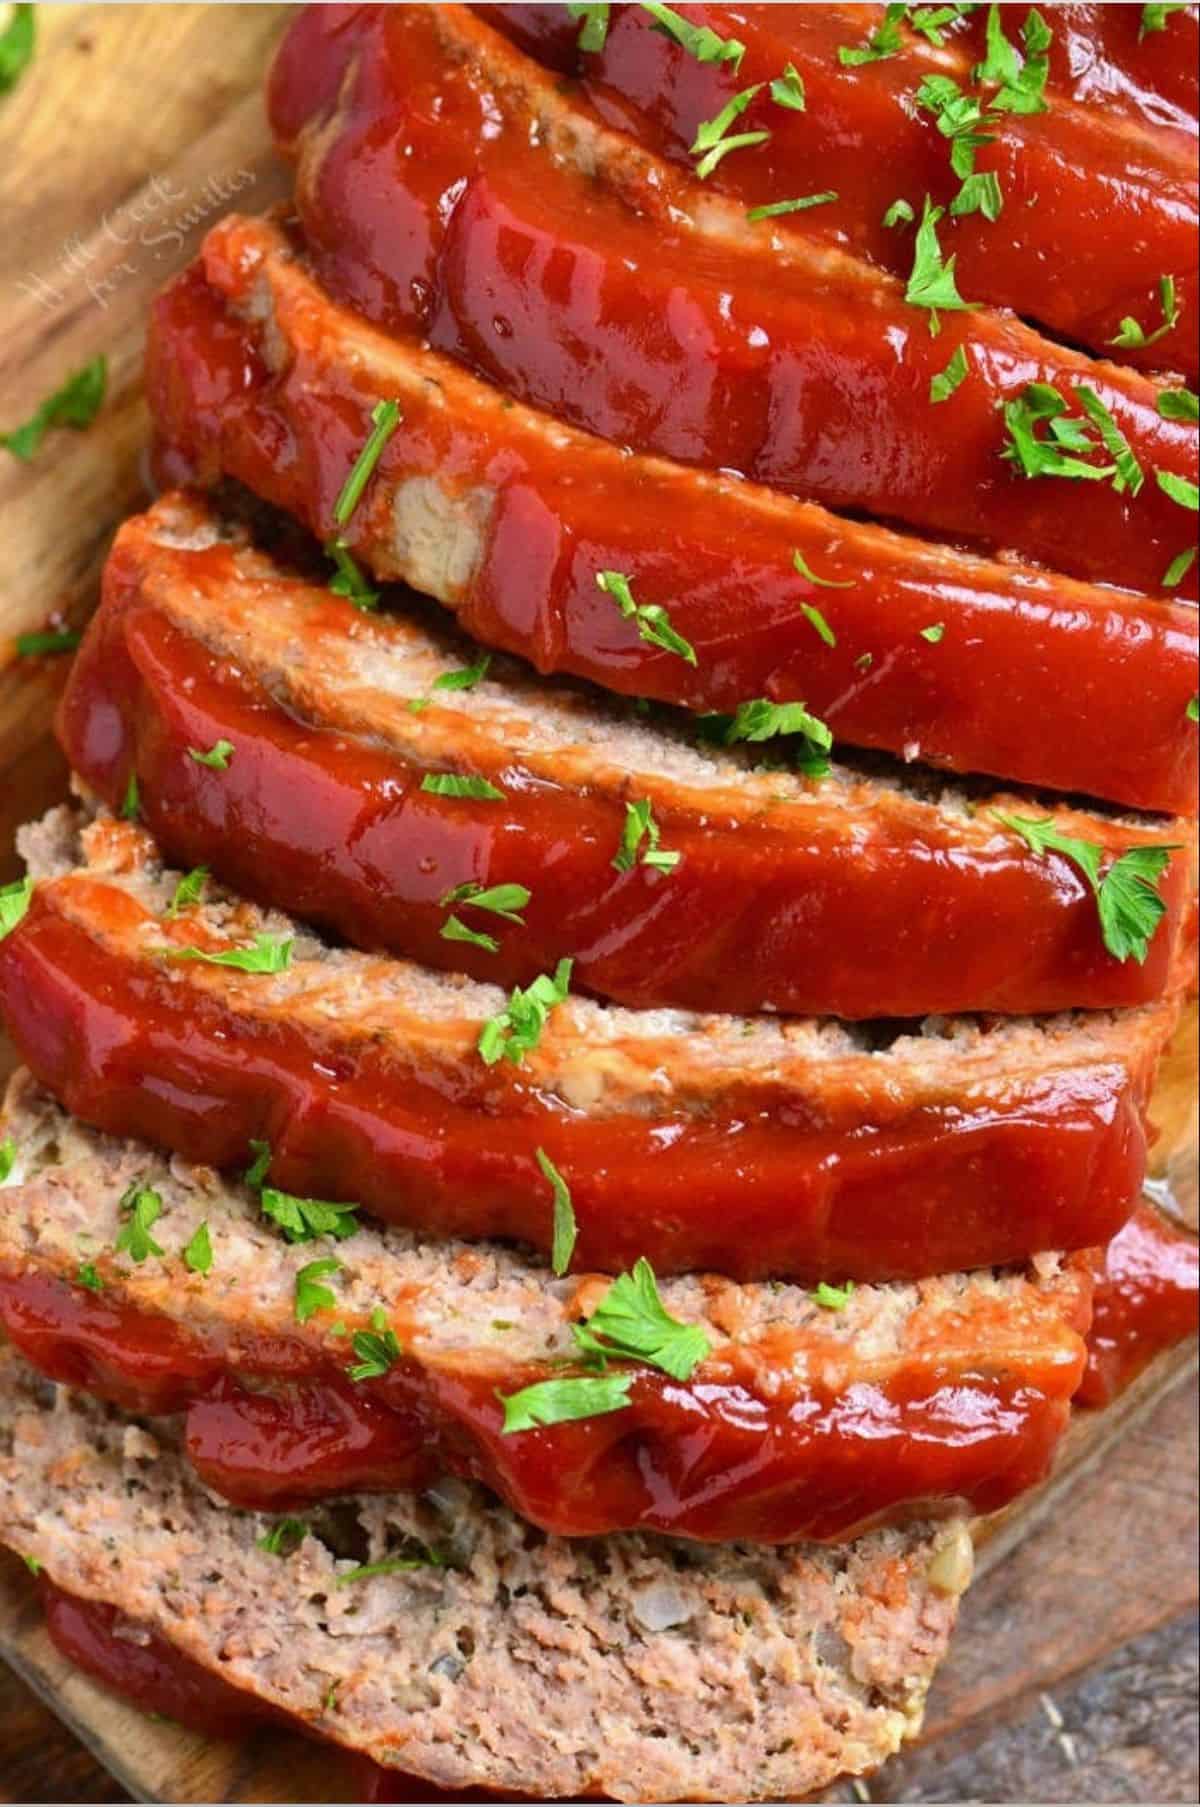 several slices of meatloaf side by site topped with ketchup topping.